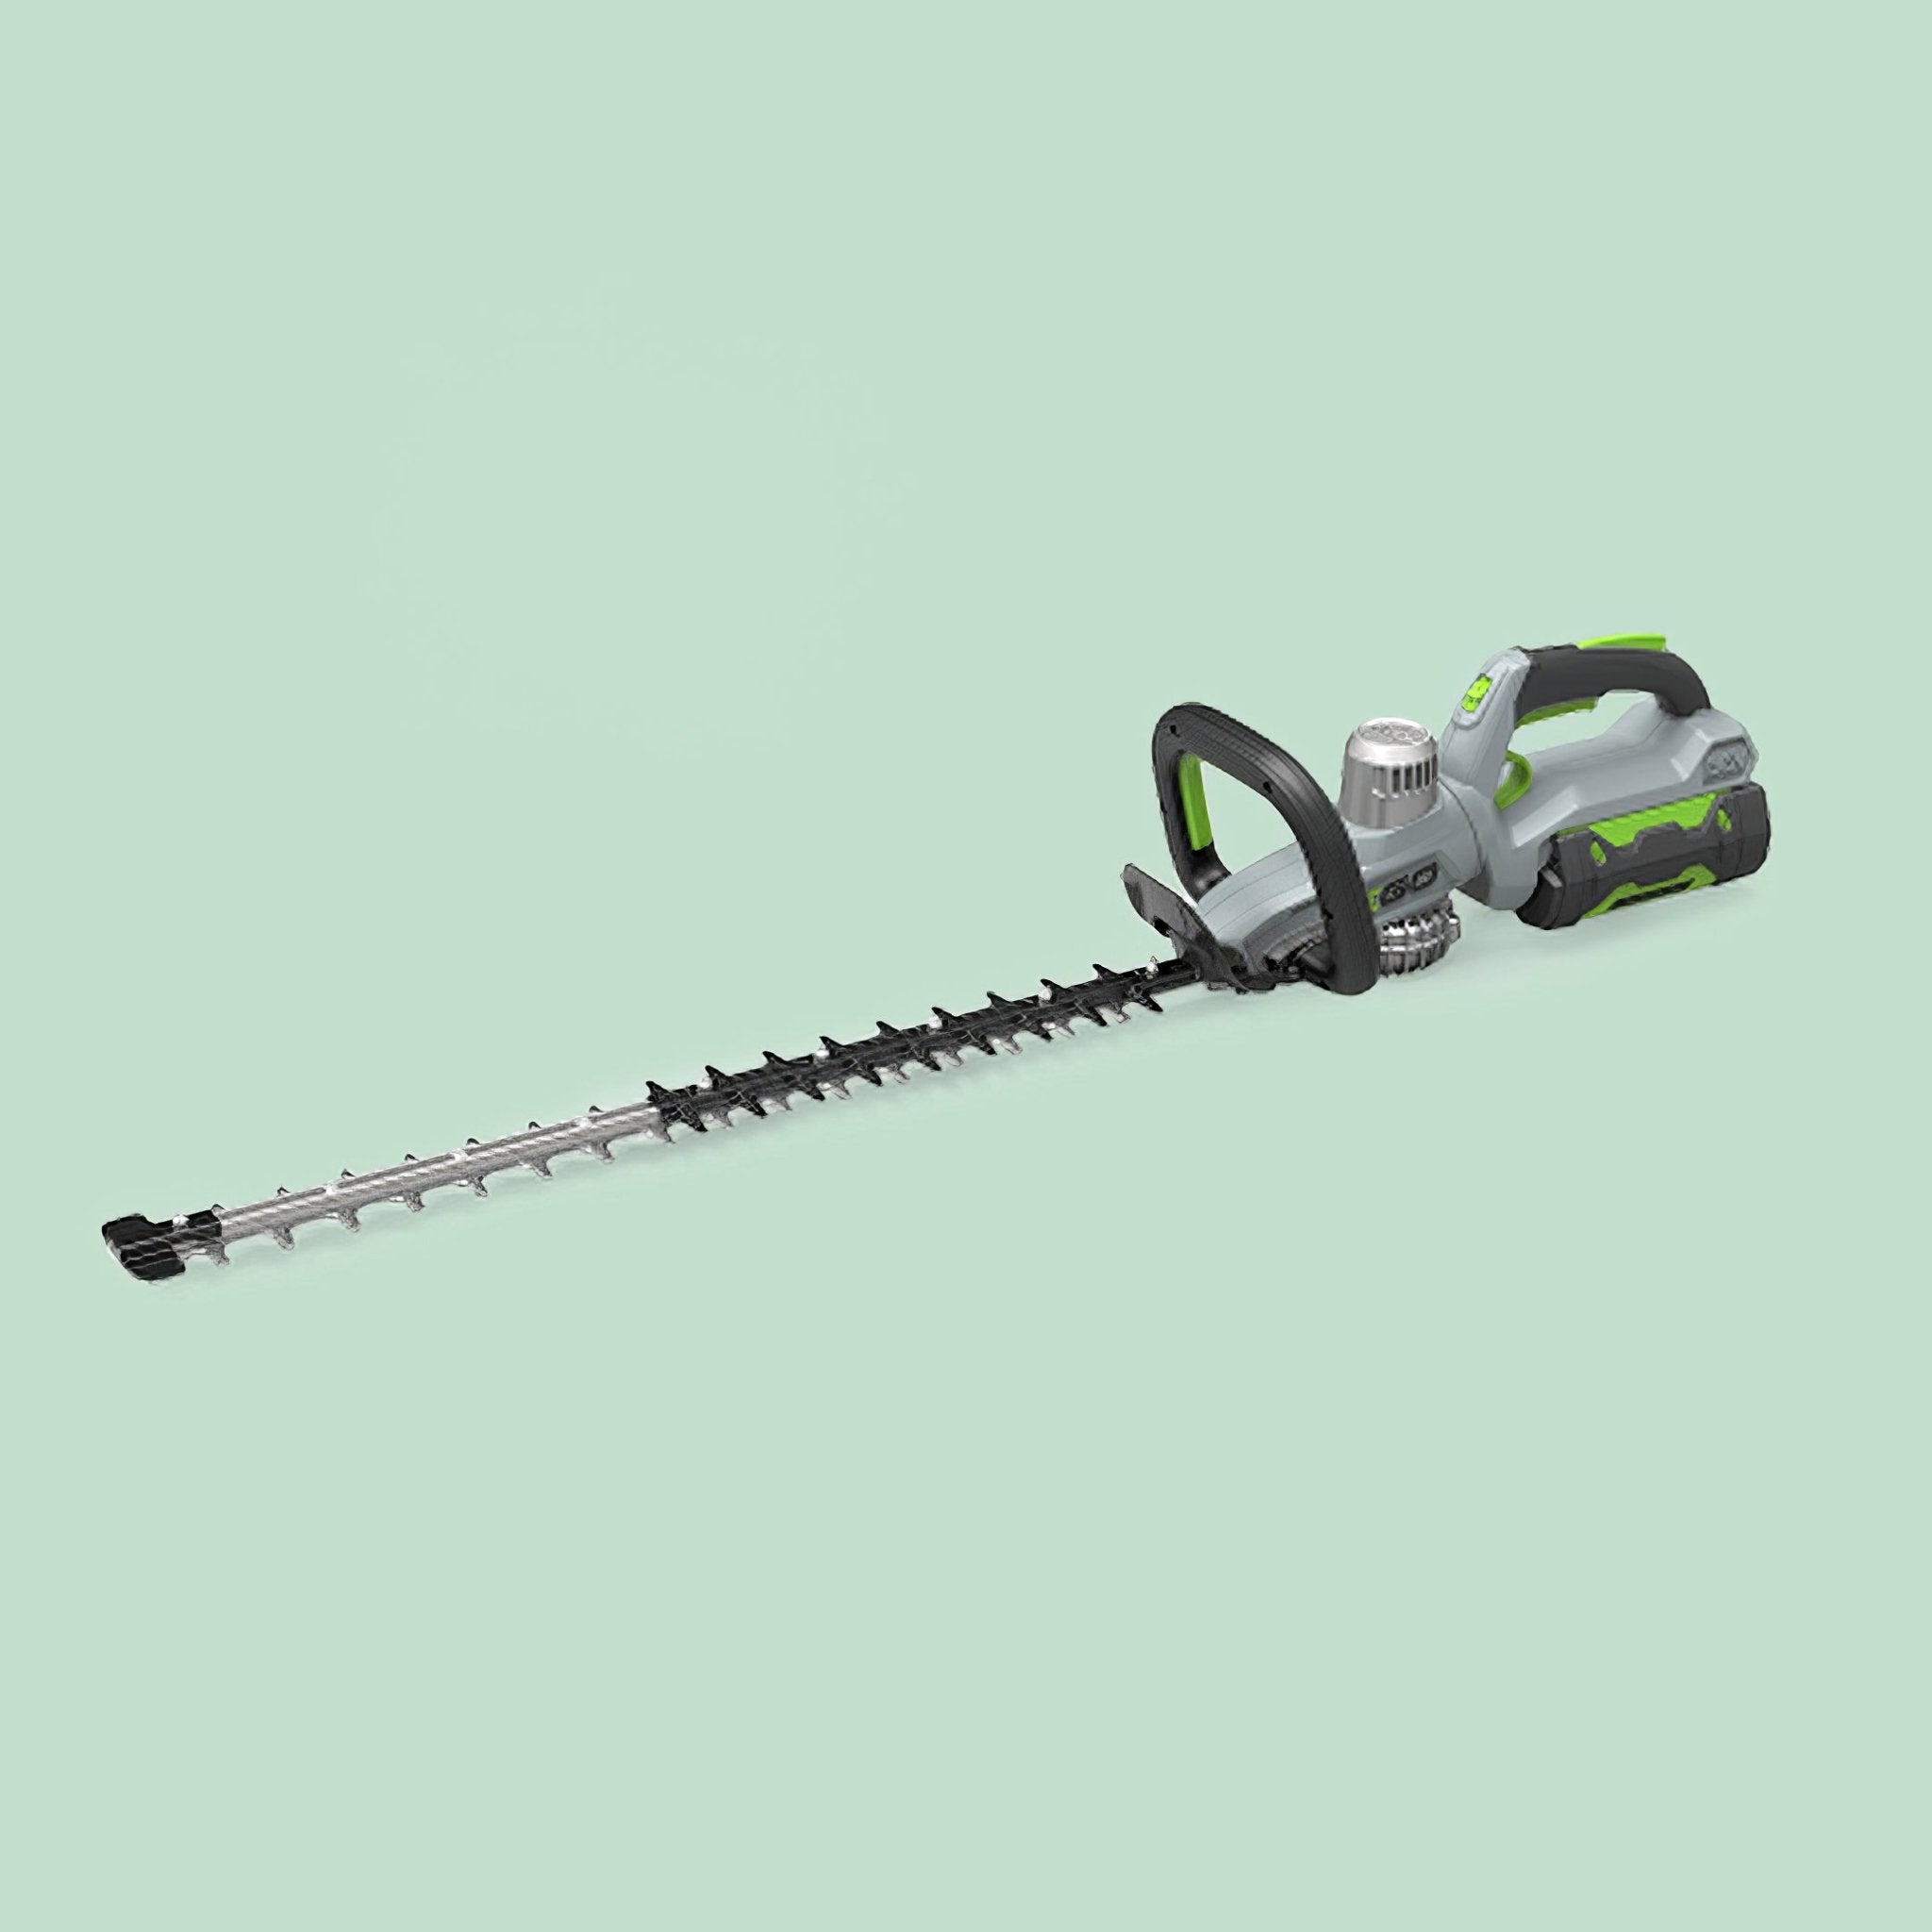 EGO 65cm Hedge Trimmer, unit only - GuanoBoost